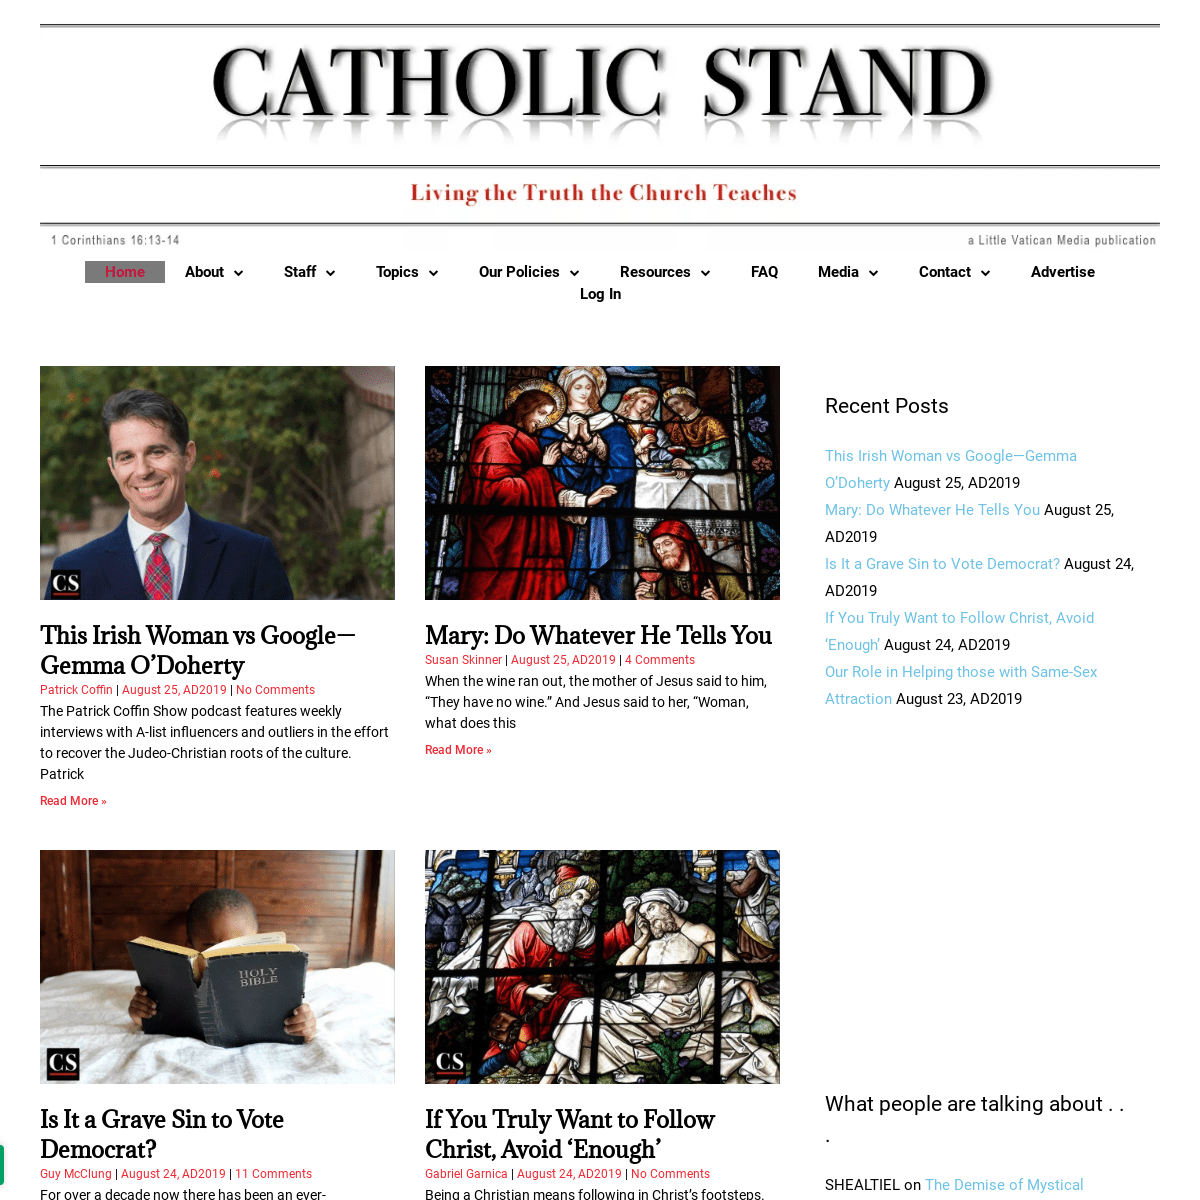 Catholic Stand - Living the Truth the Church Teaches